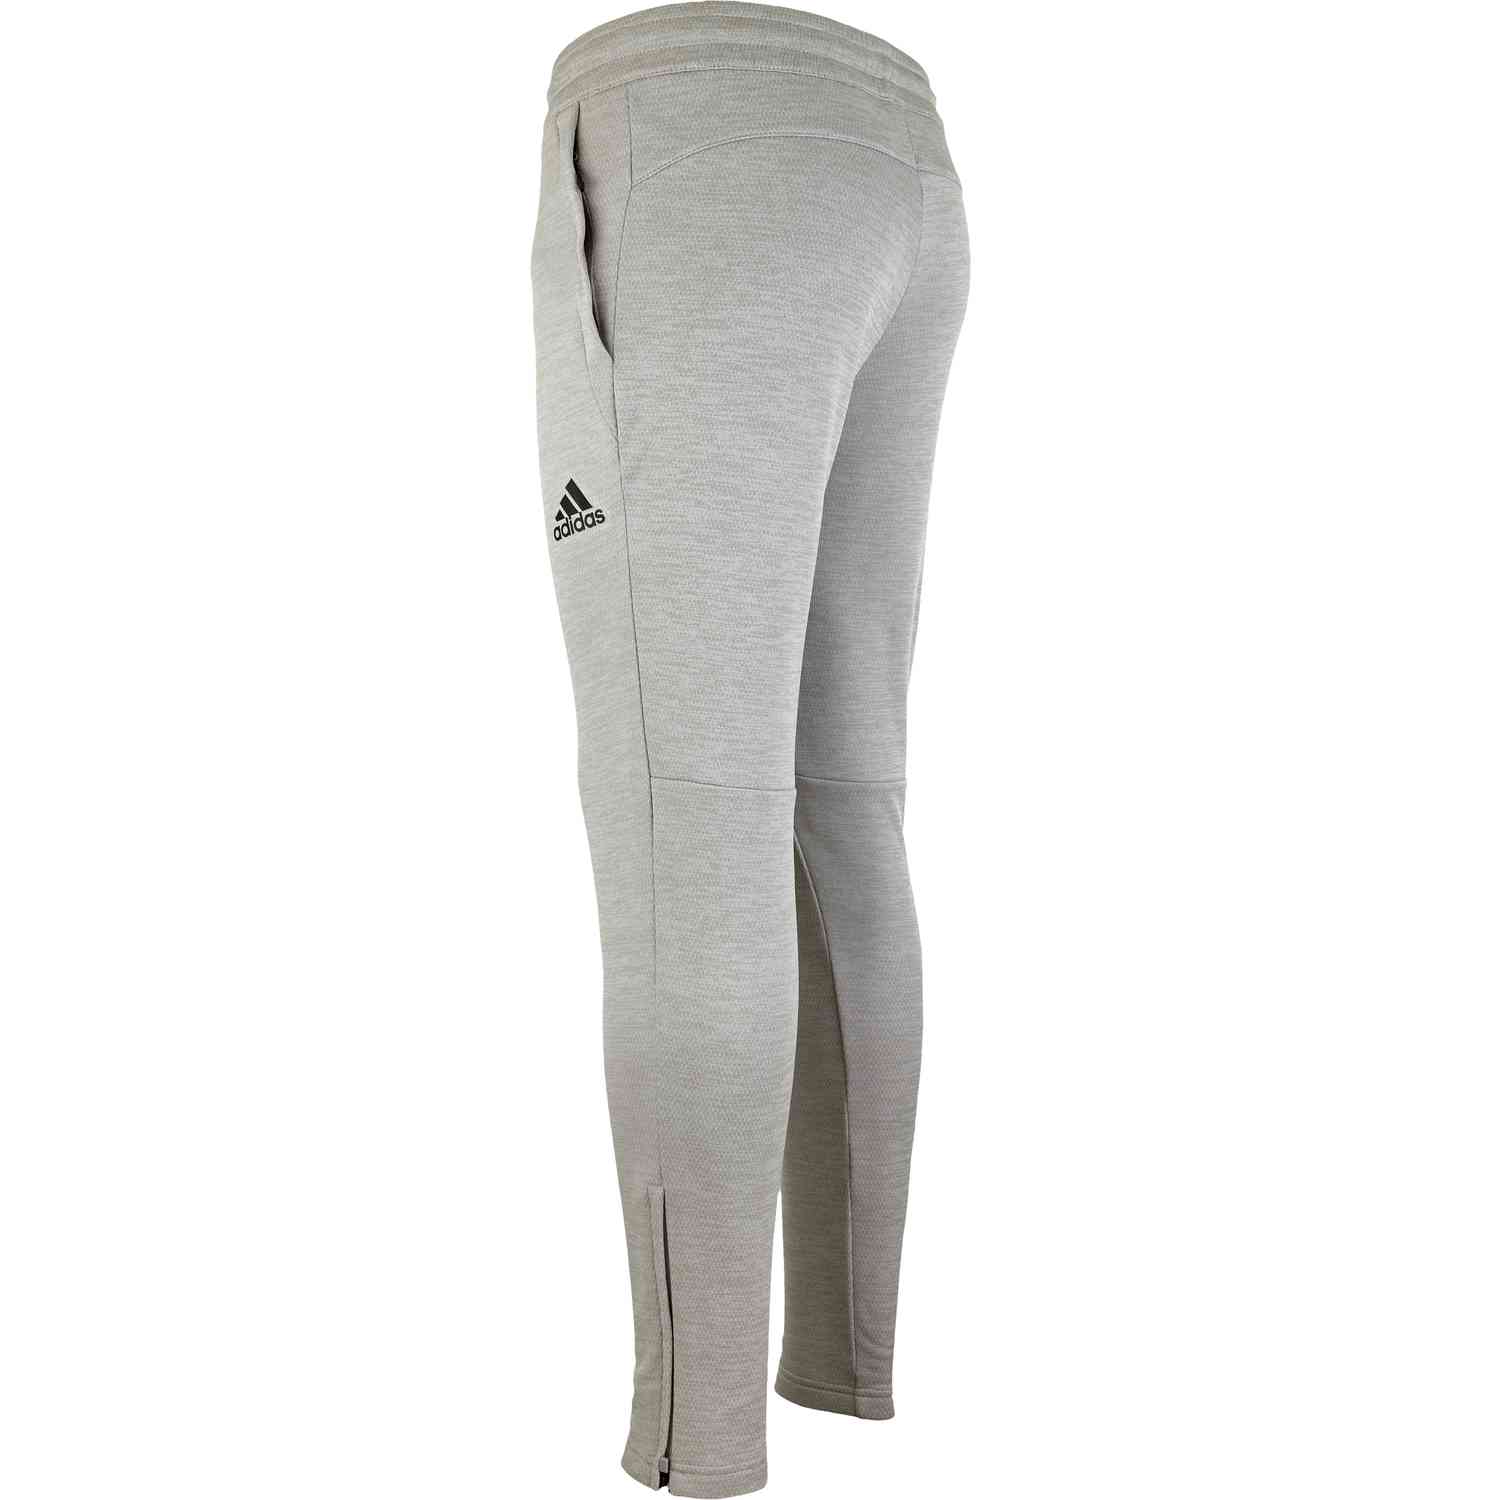 adidas Team Issue Lifestyle Tapered Pants - MGH Solid Grey - SoccerPro